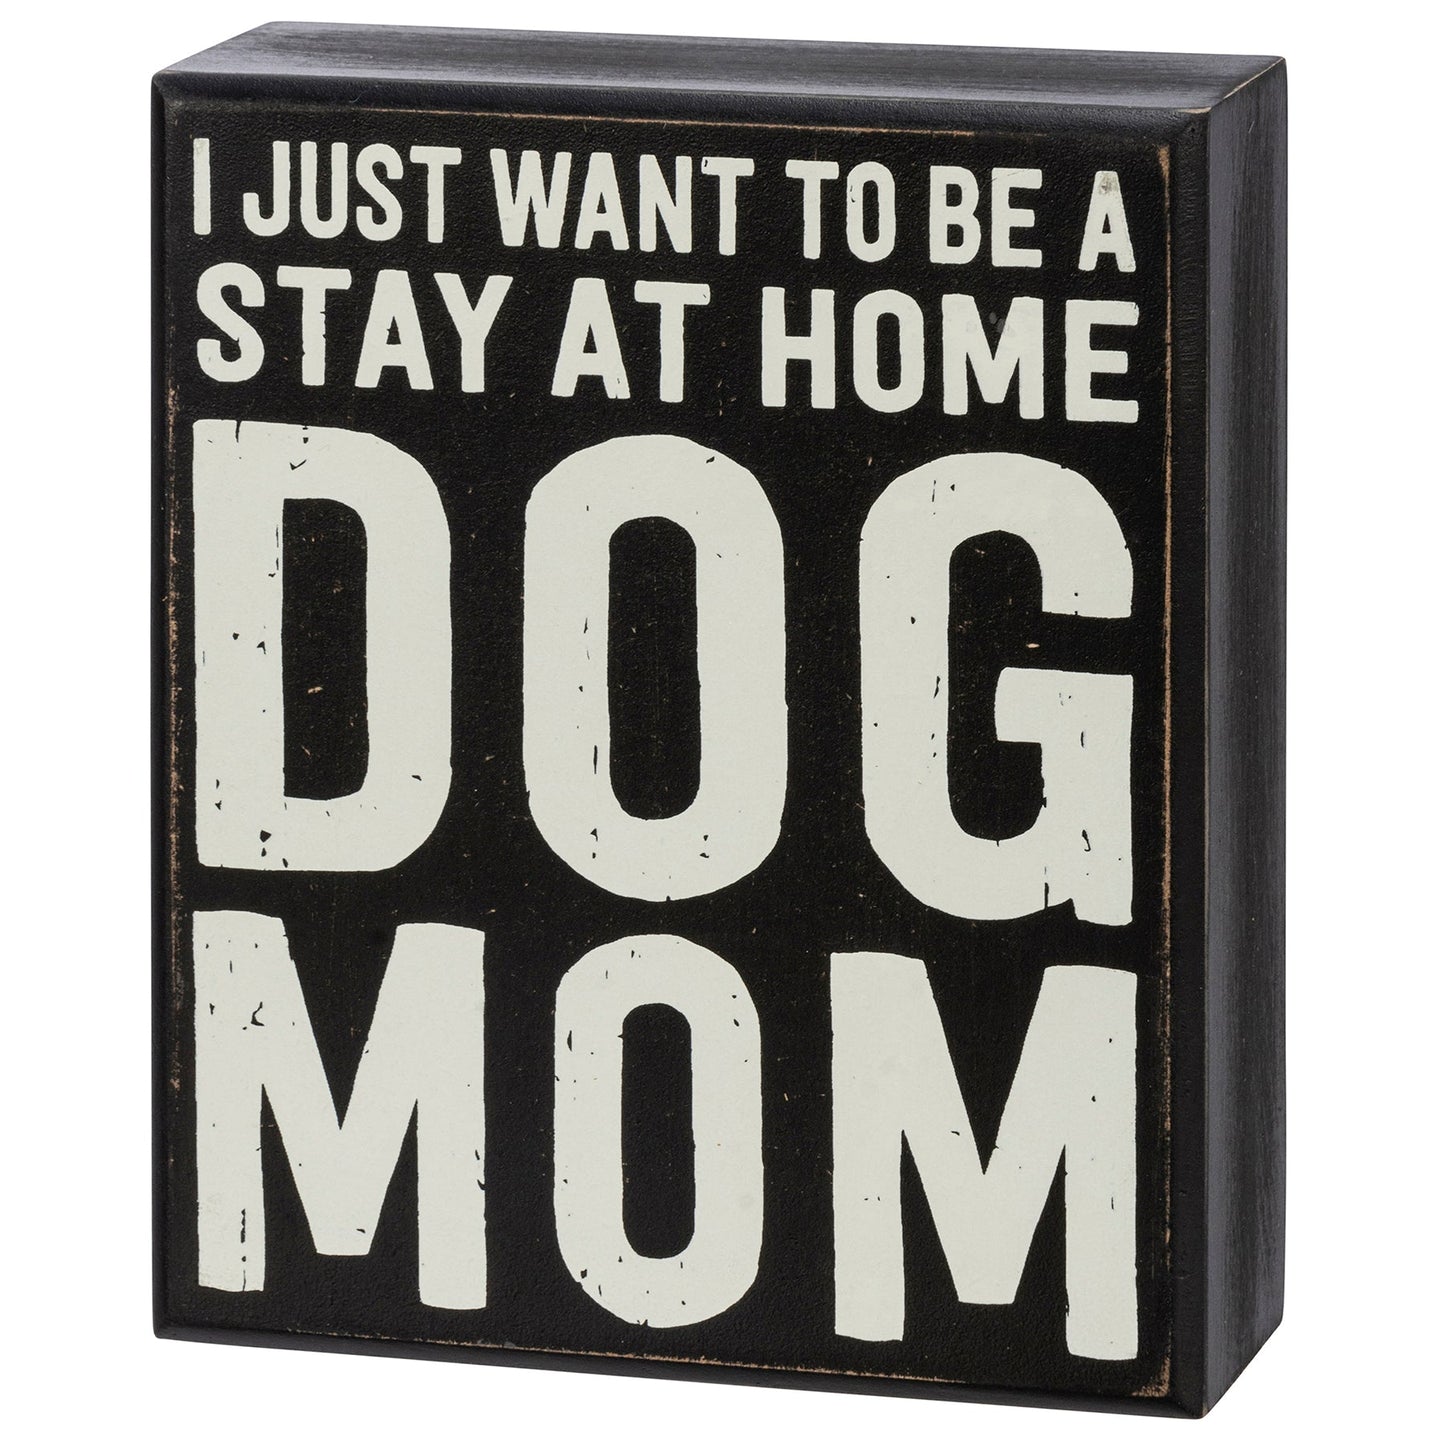 My Kids Have Paws Dog Mom Box Sign And Candle Giftable Set